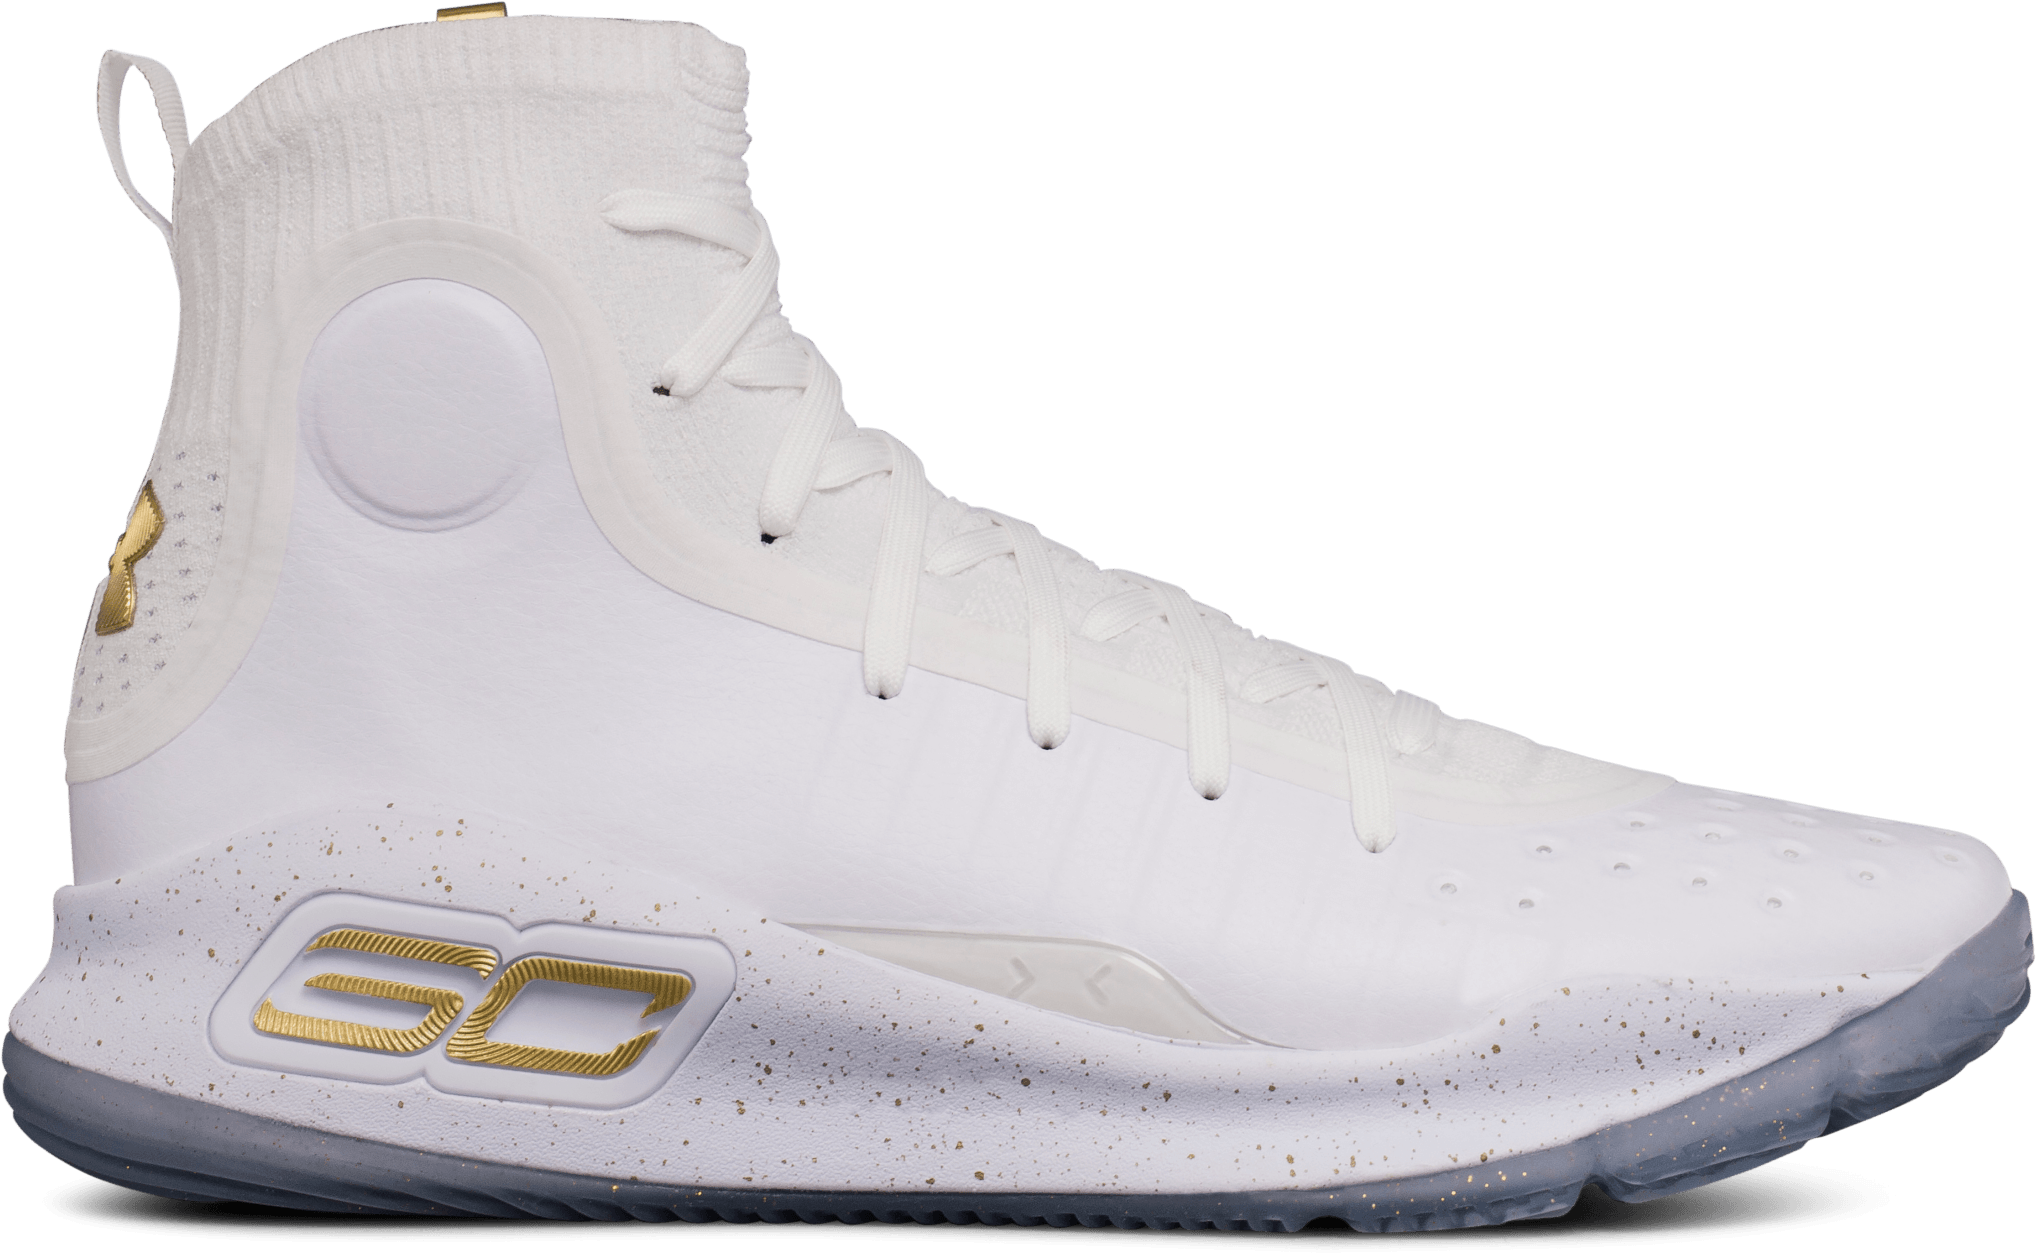 Under Armour Curry 4 Colorways - 12 Styles